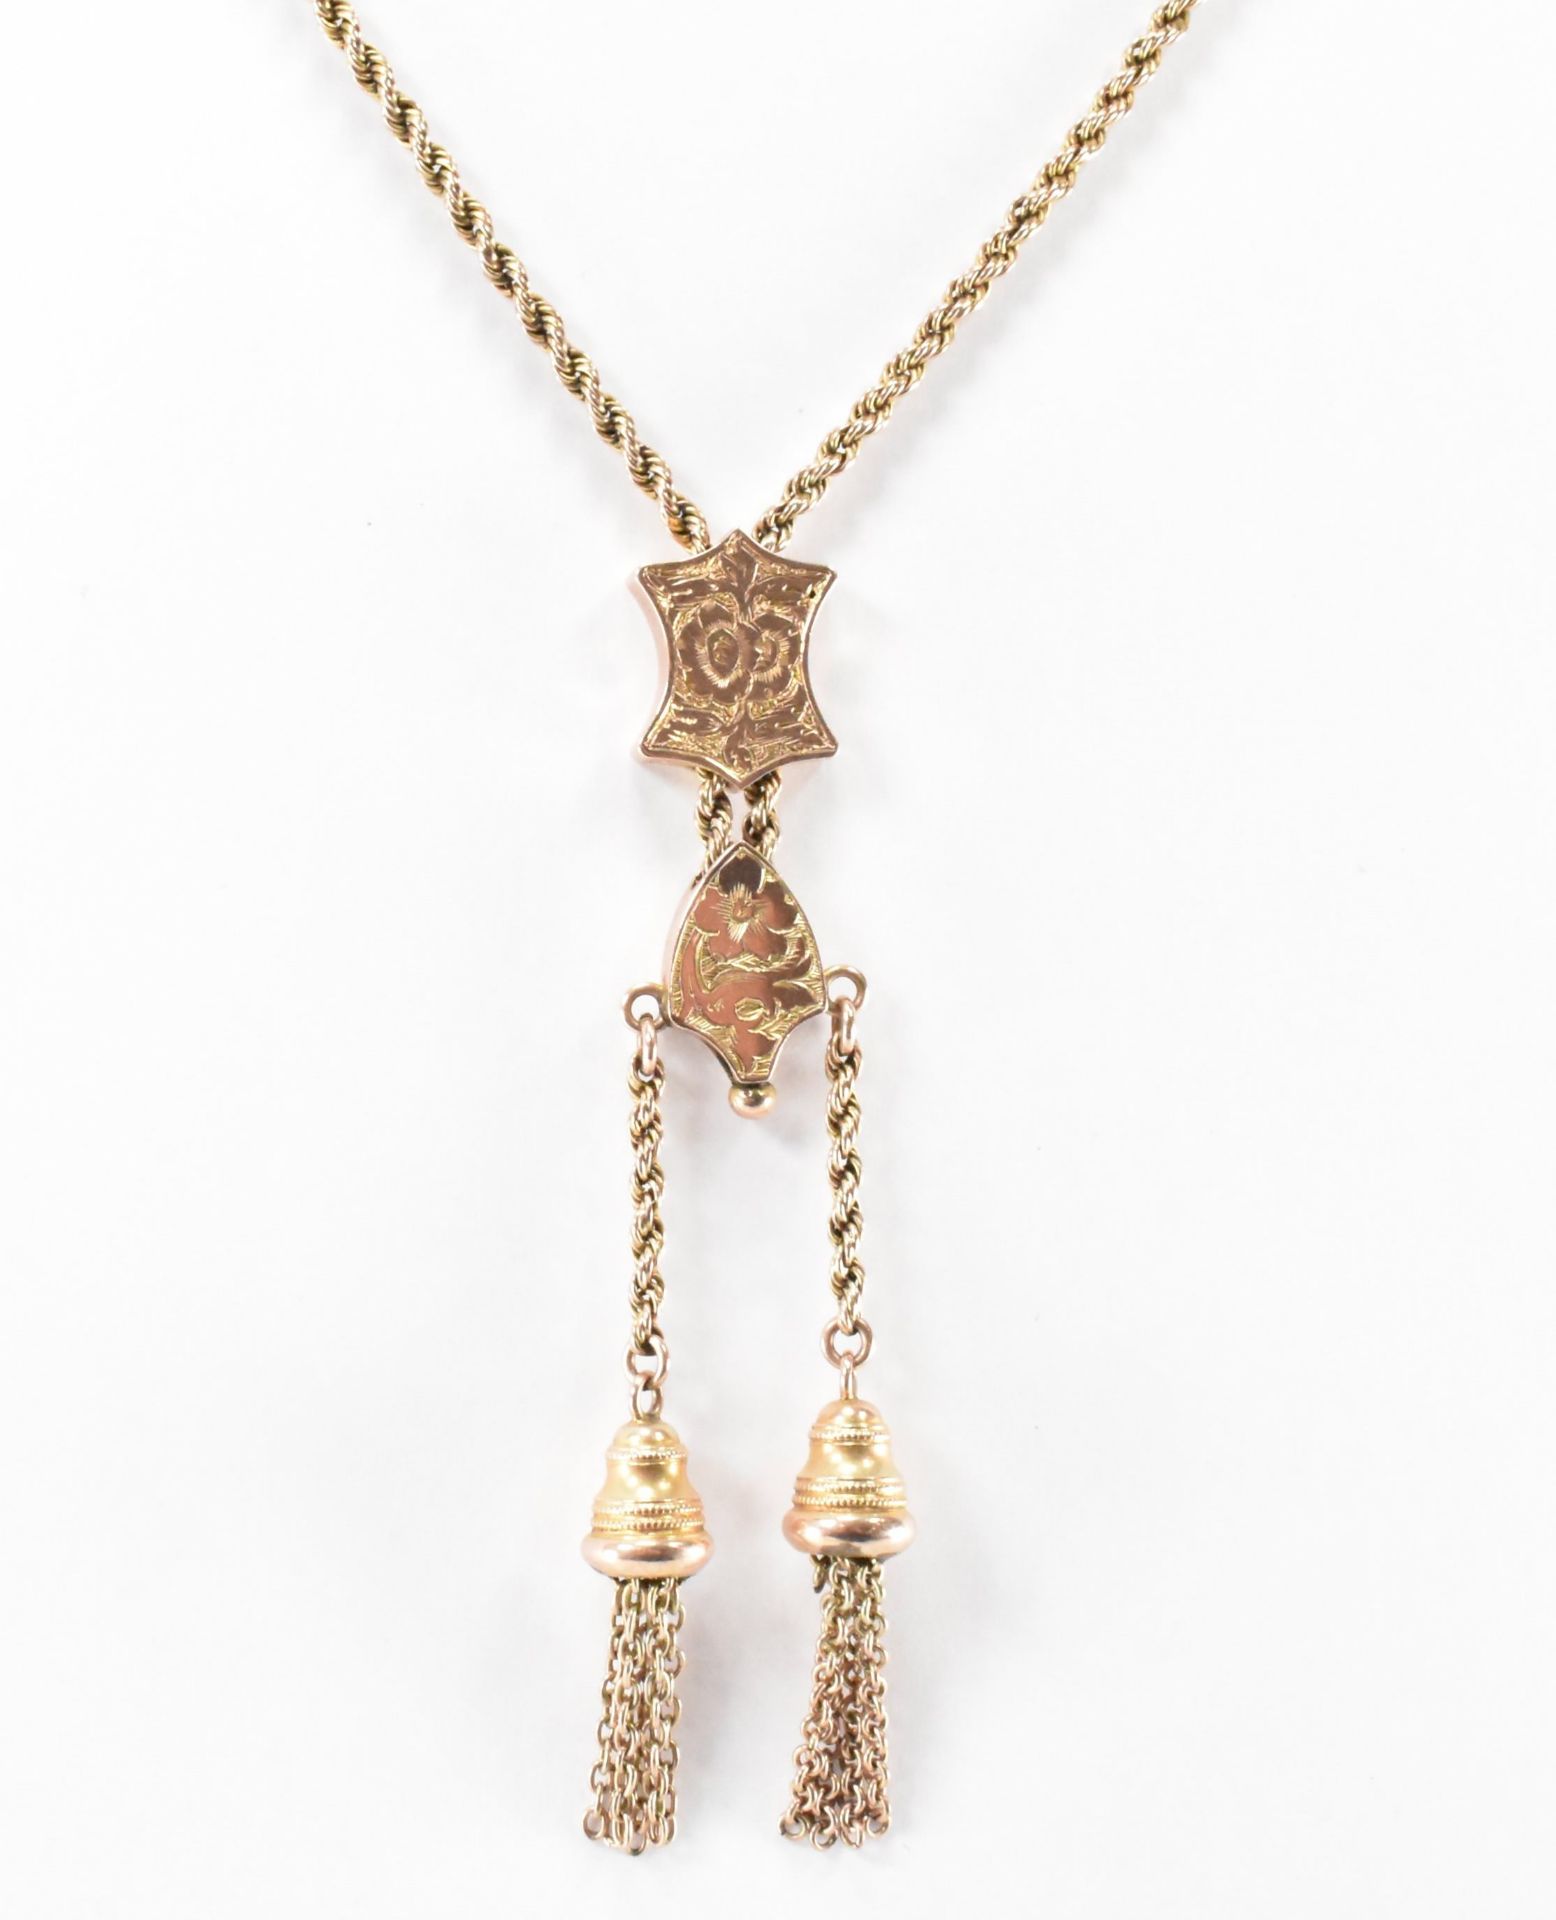 VICTORIAN 9CT GOLD POCKET WATCH CHAIN NECKLACE